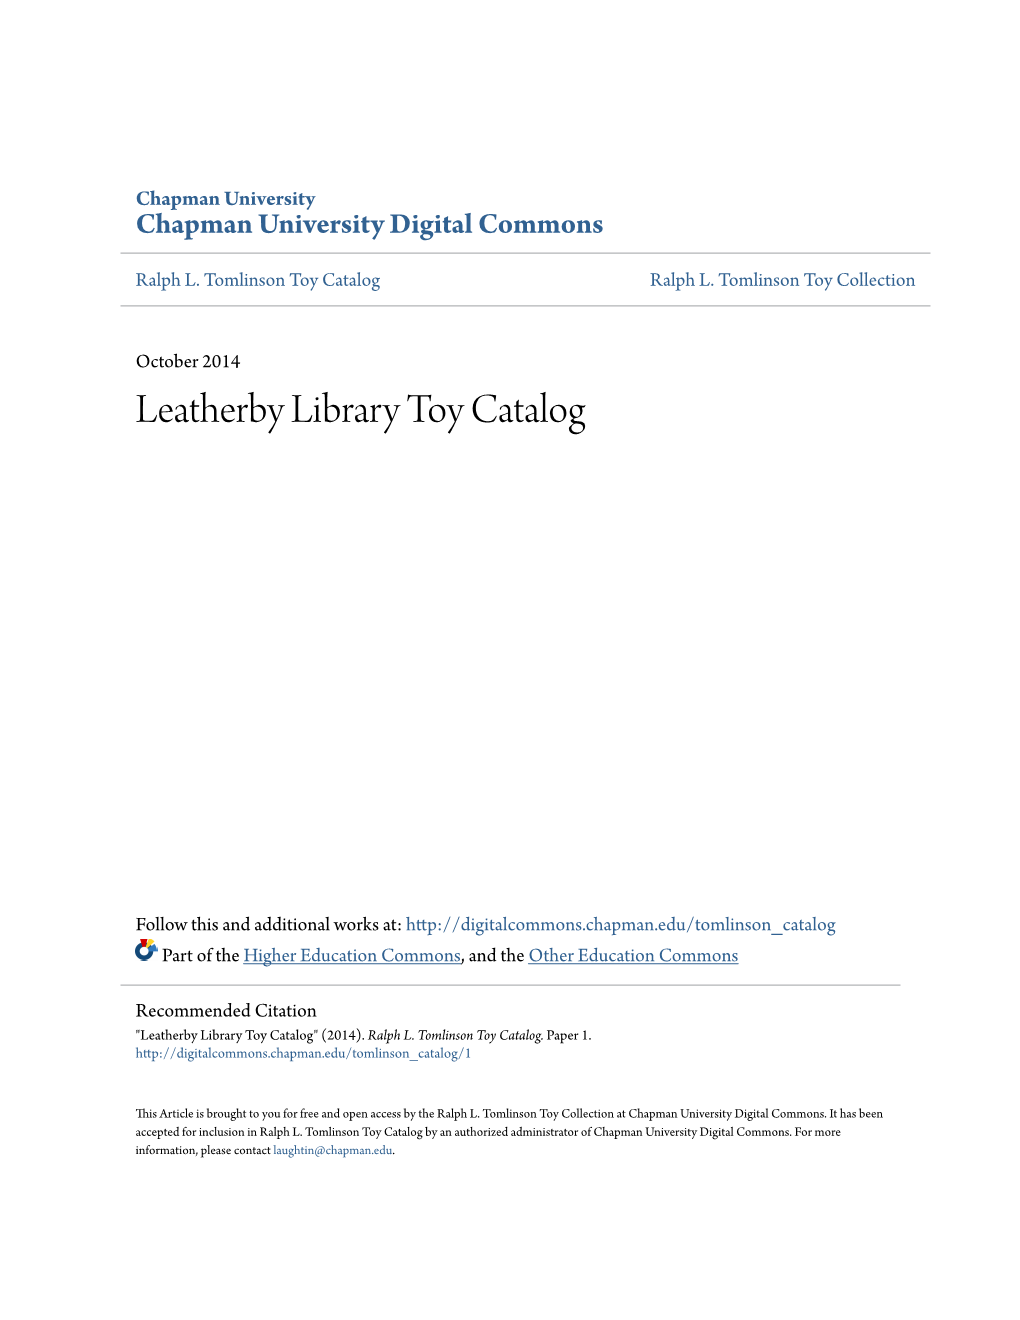 Leatherby Library Toy Catalog